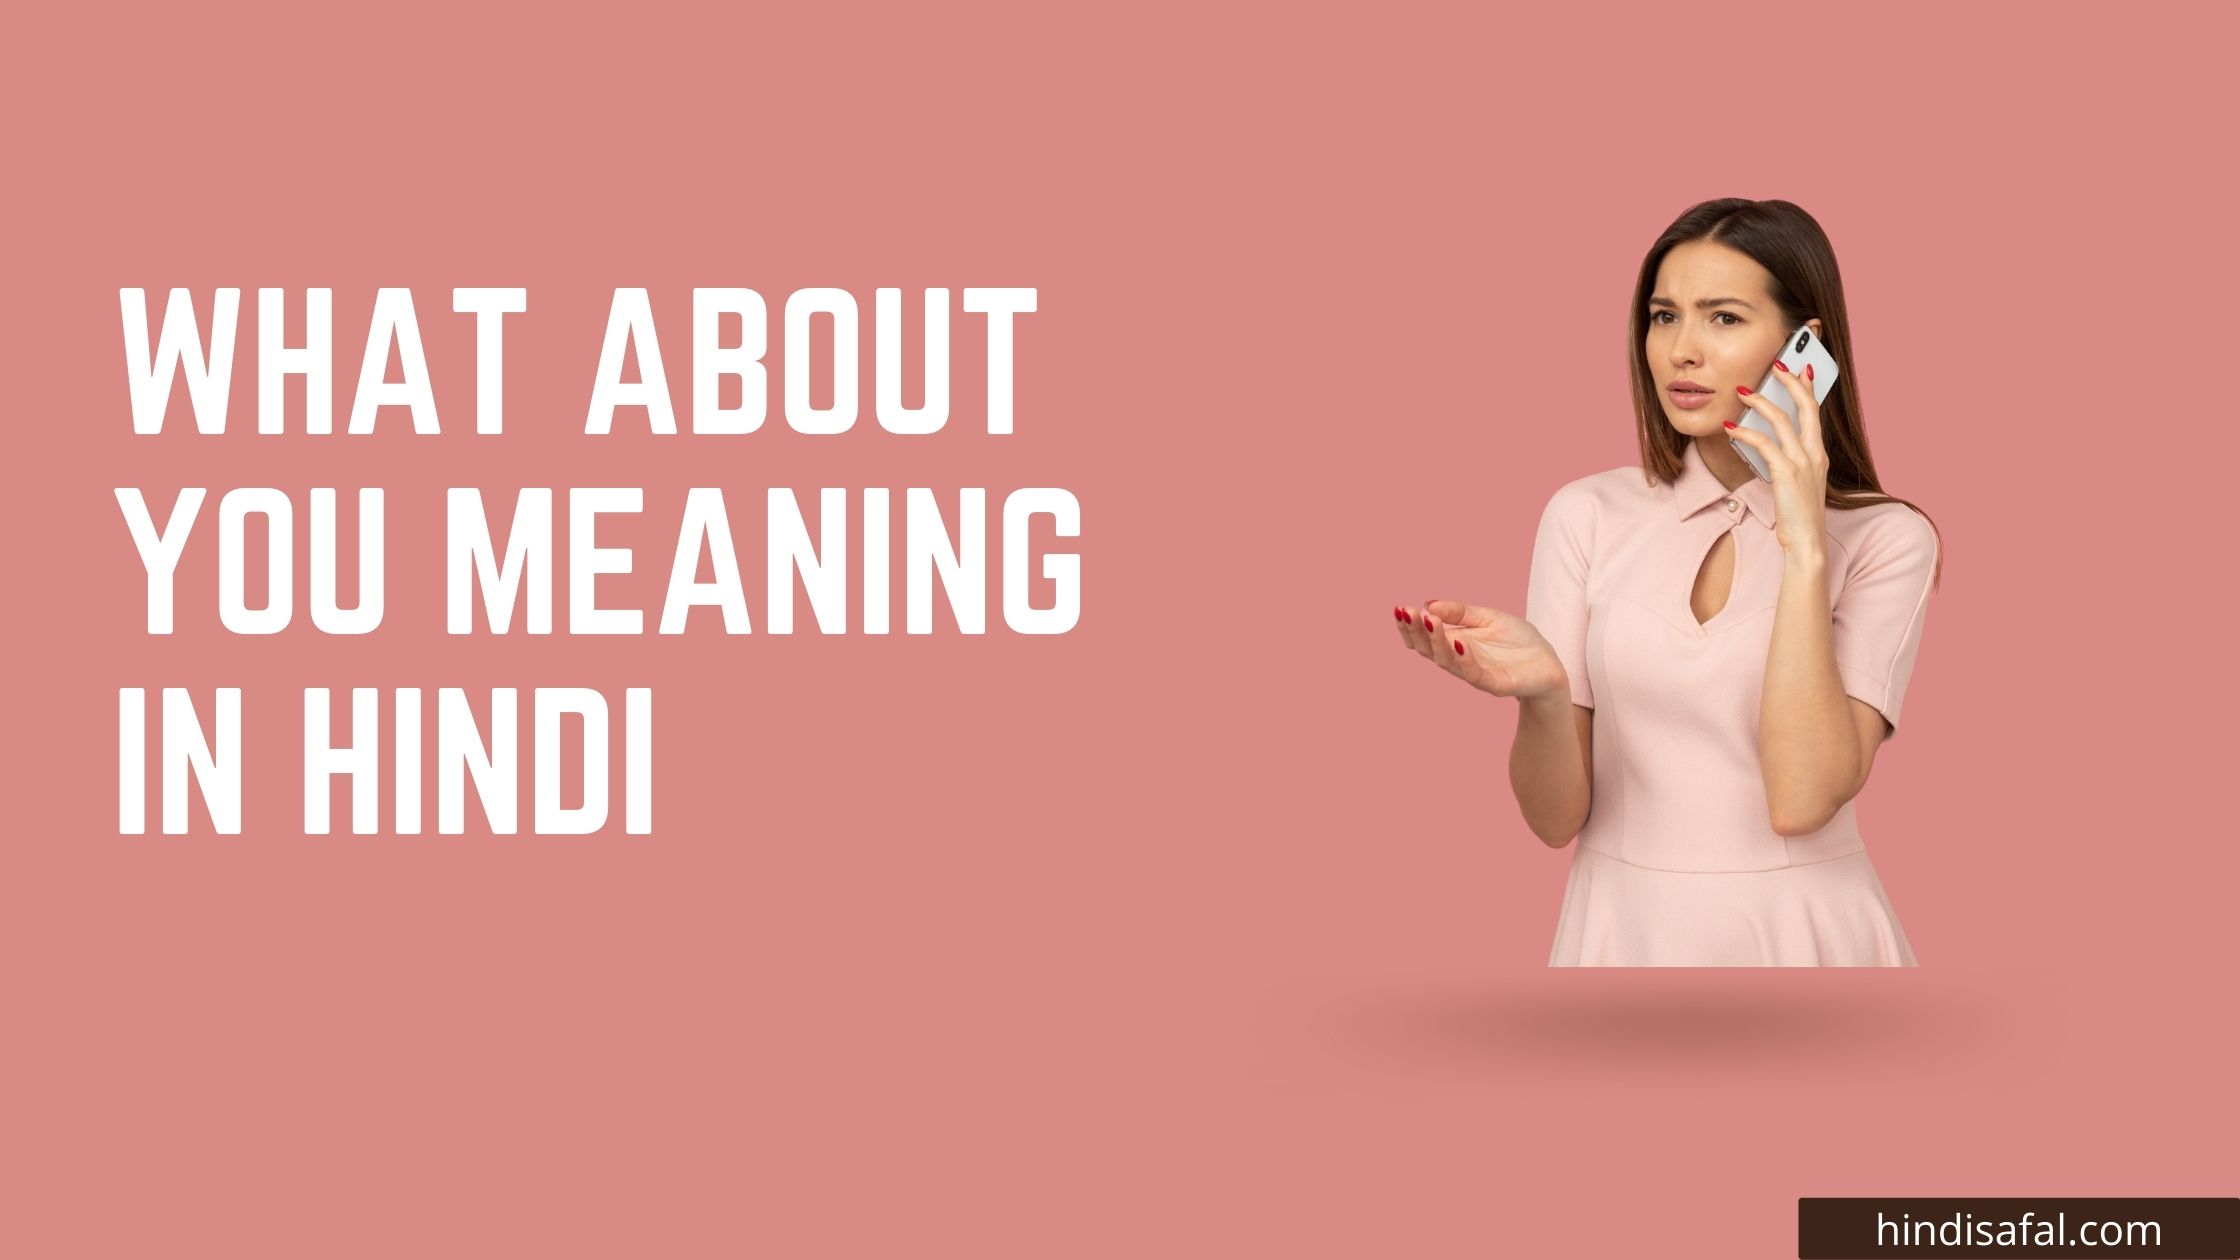 What About You Meaning in Hindi